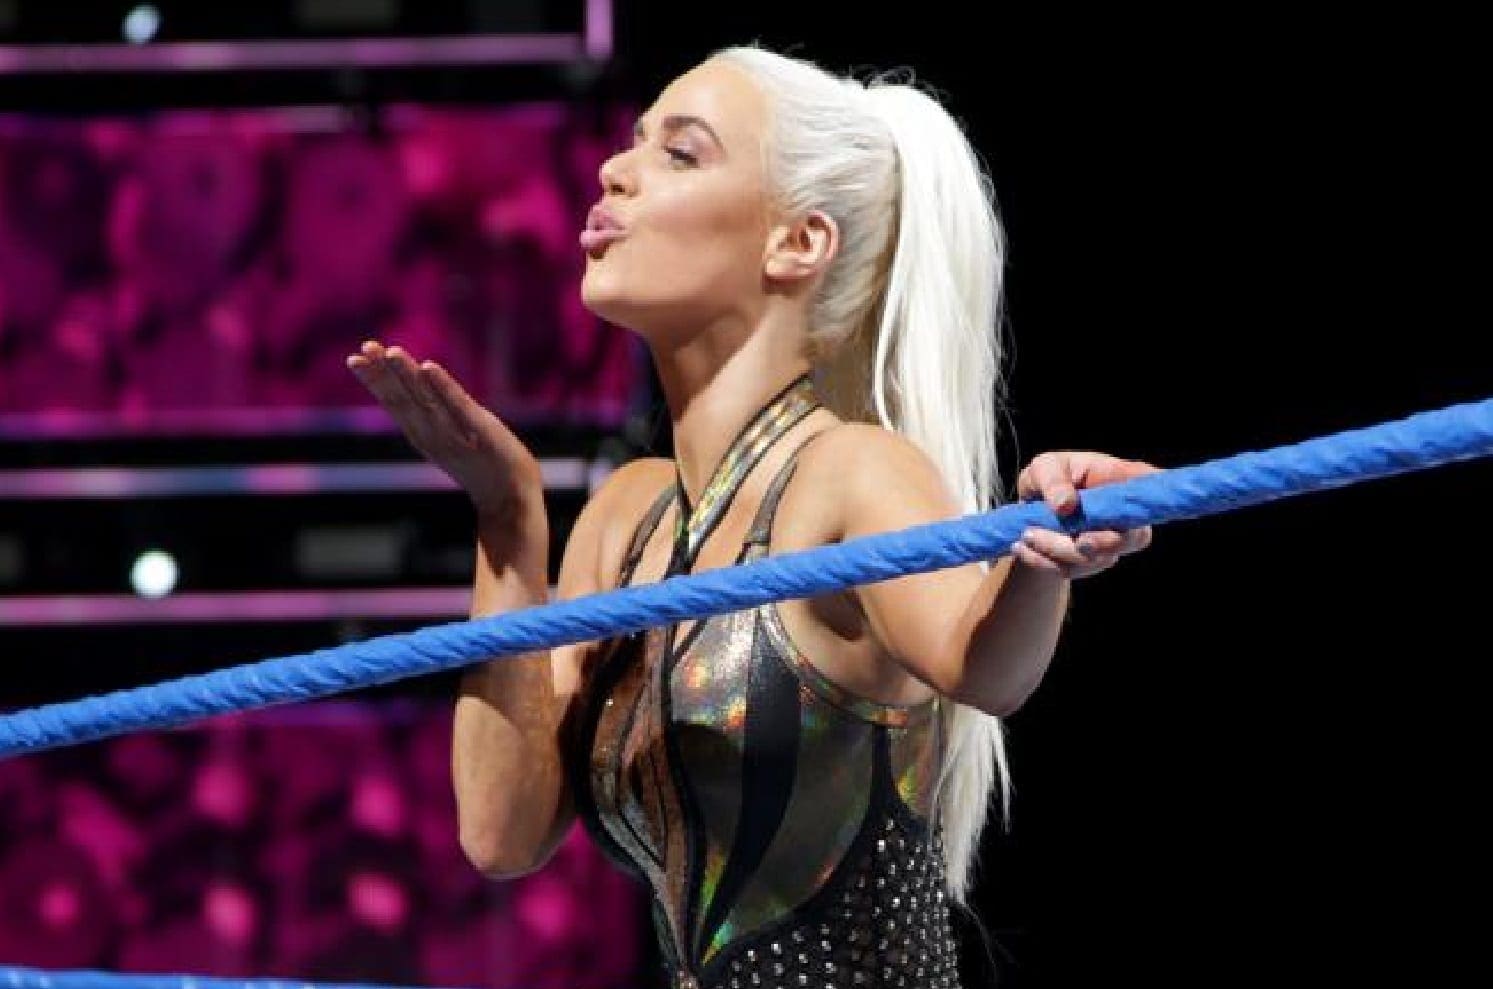 Lana Taking Bumps Off Ladders To Prepare For Money In The Bank